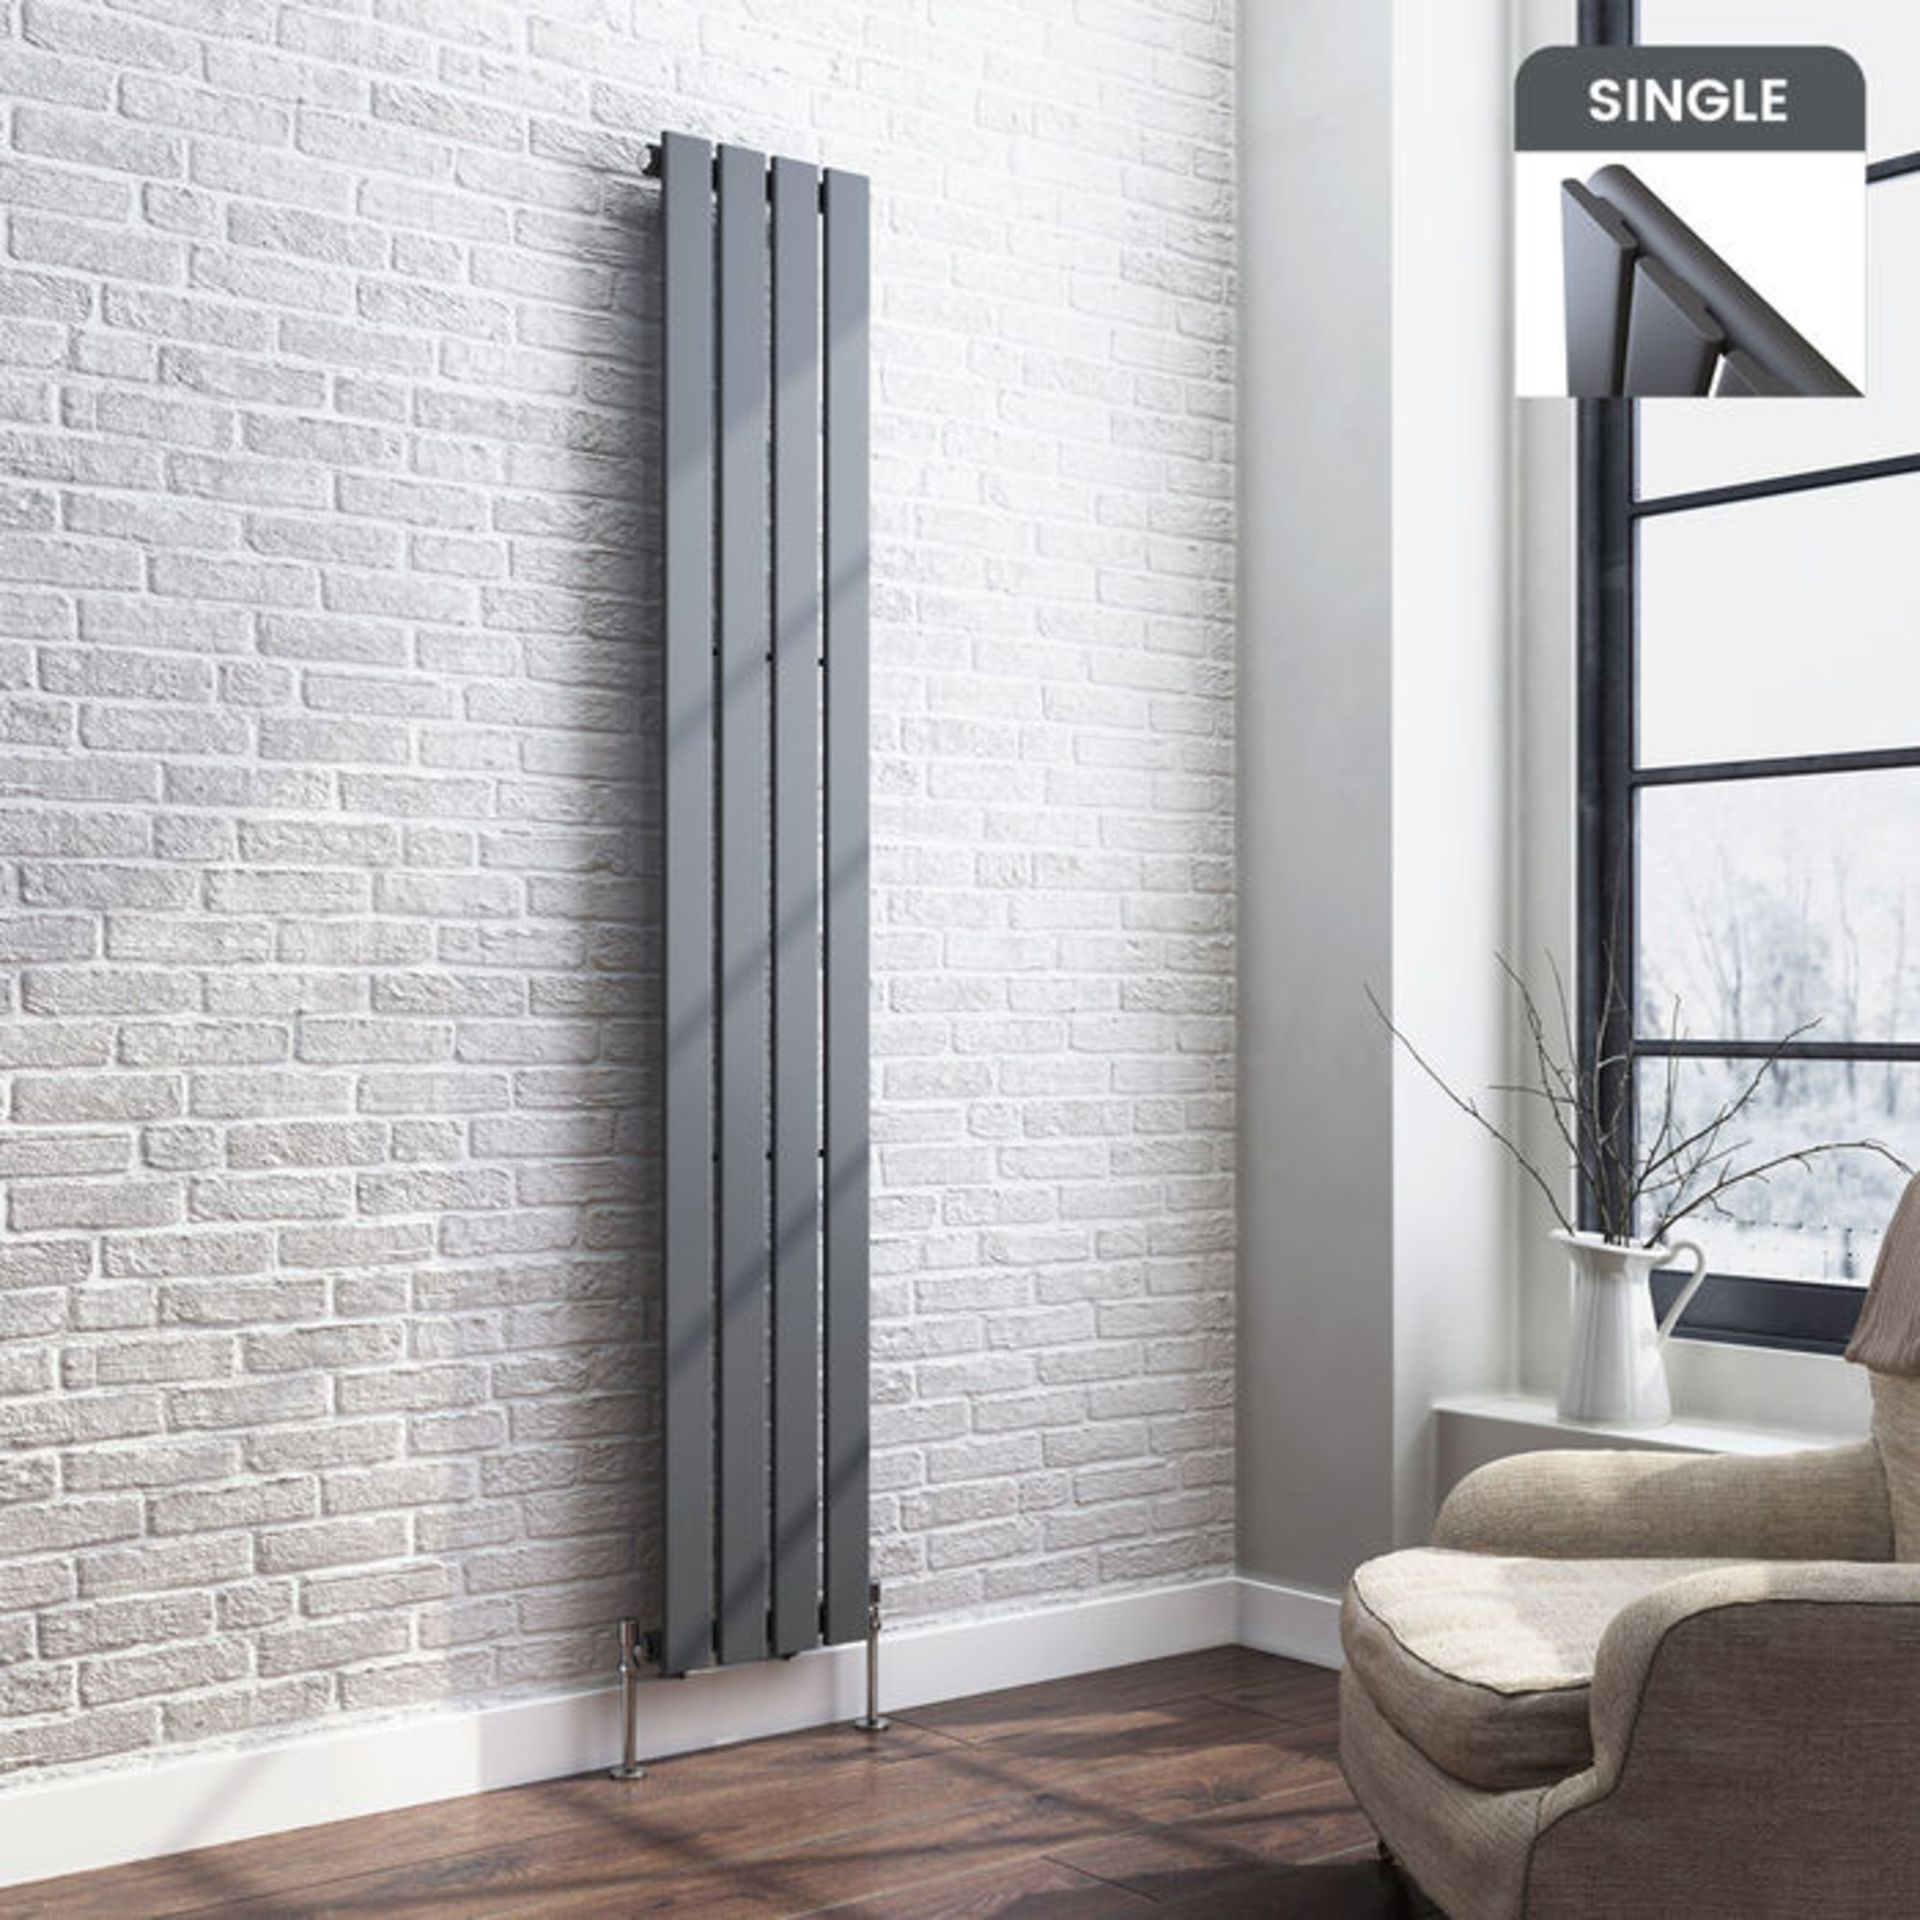 (HS113) 1800x300mm Anthracite Single Flat Panel Vertical Radiator. Made with low carbon steel Anti-